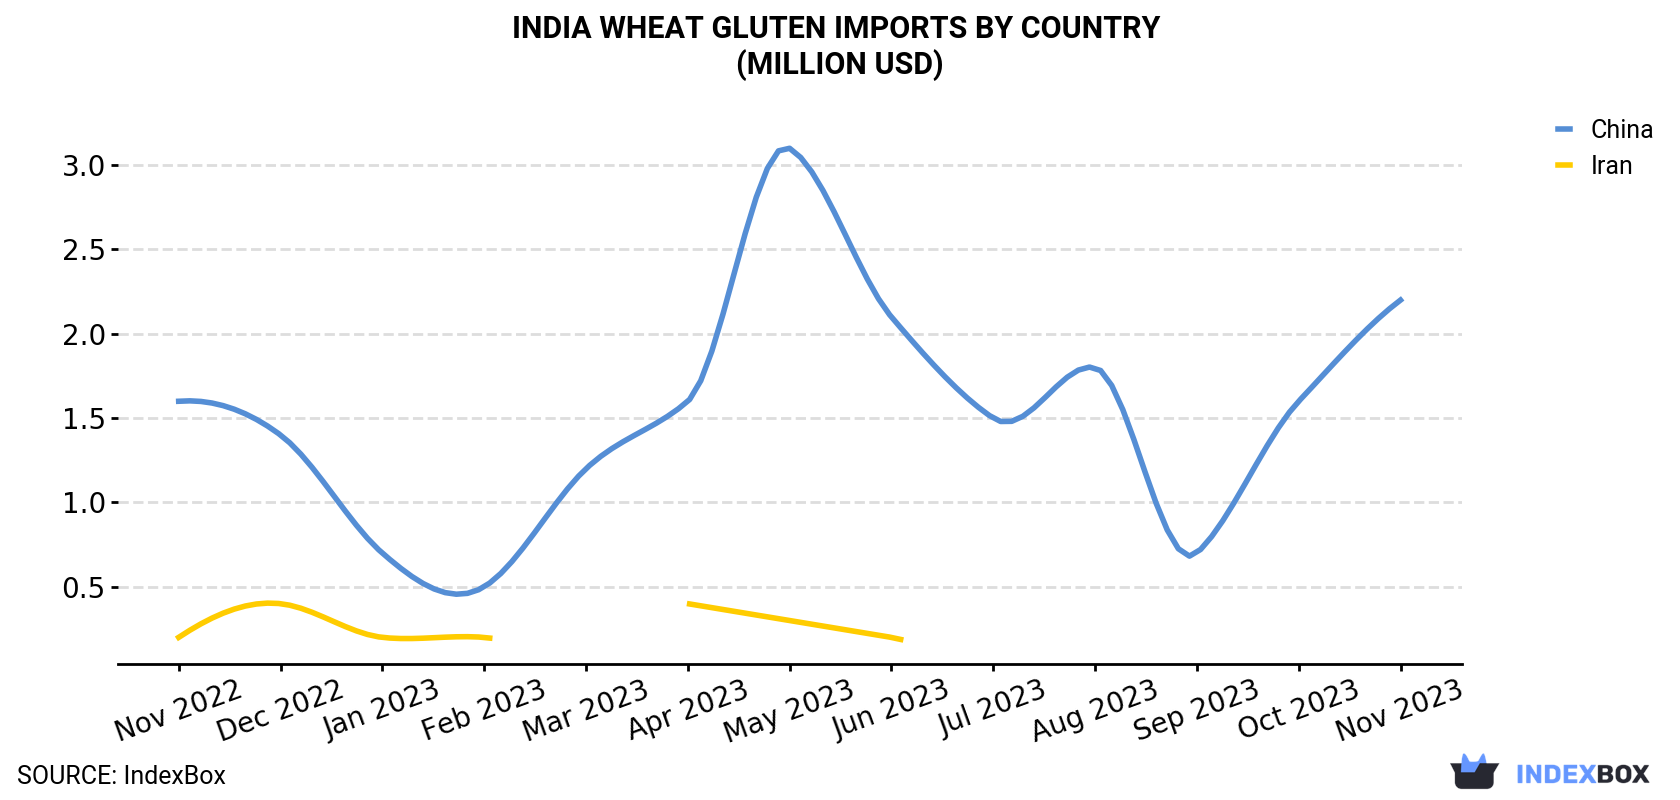 India Wheat Gluten Imports By Country (Million USD)